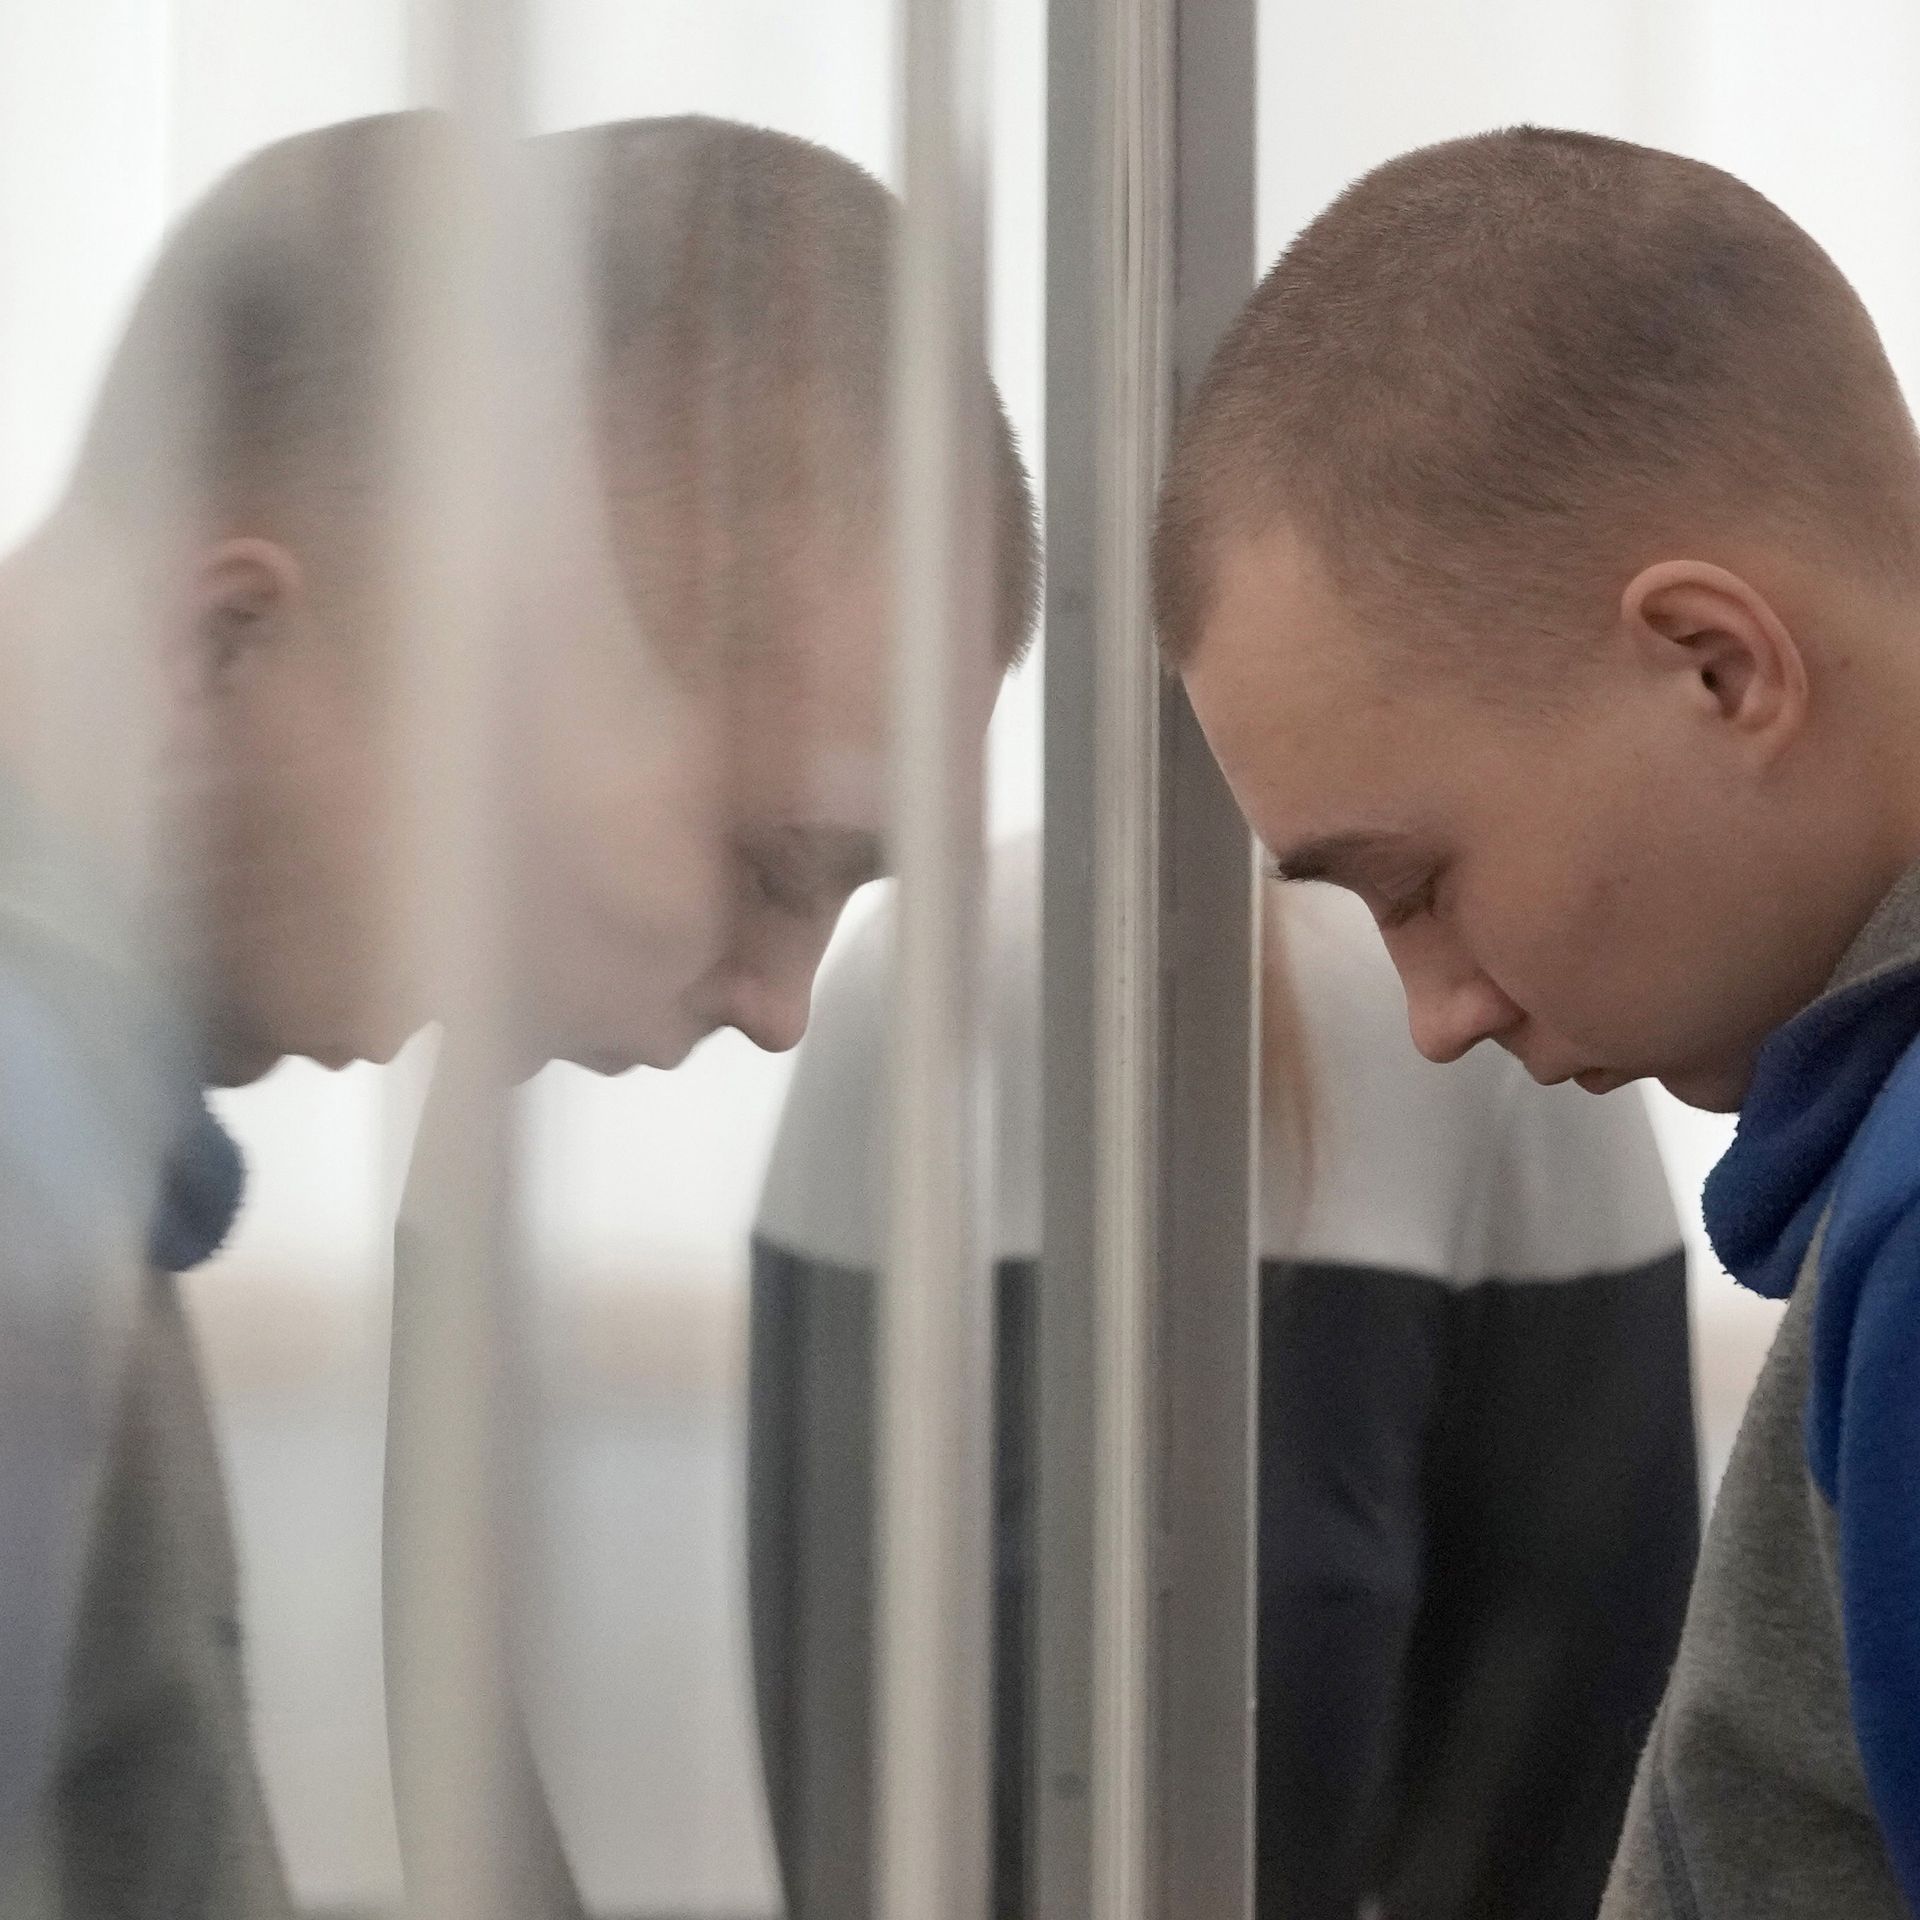 Sgt. Vadim Shishimarin of the Russian army appears at a sentencing hearing on May 23, 2022 in Kyiv, Ukraine.